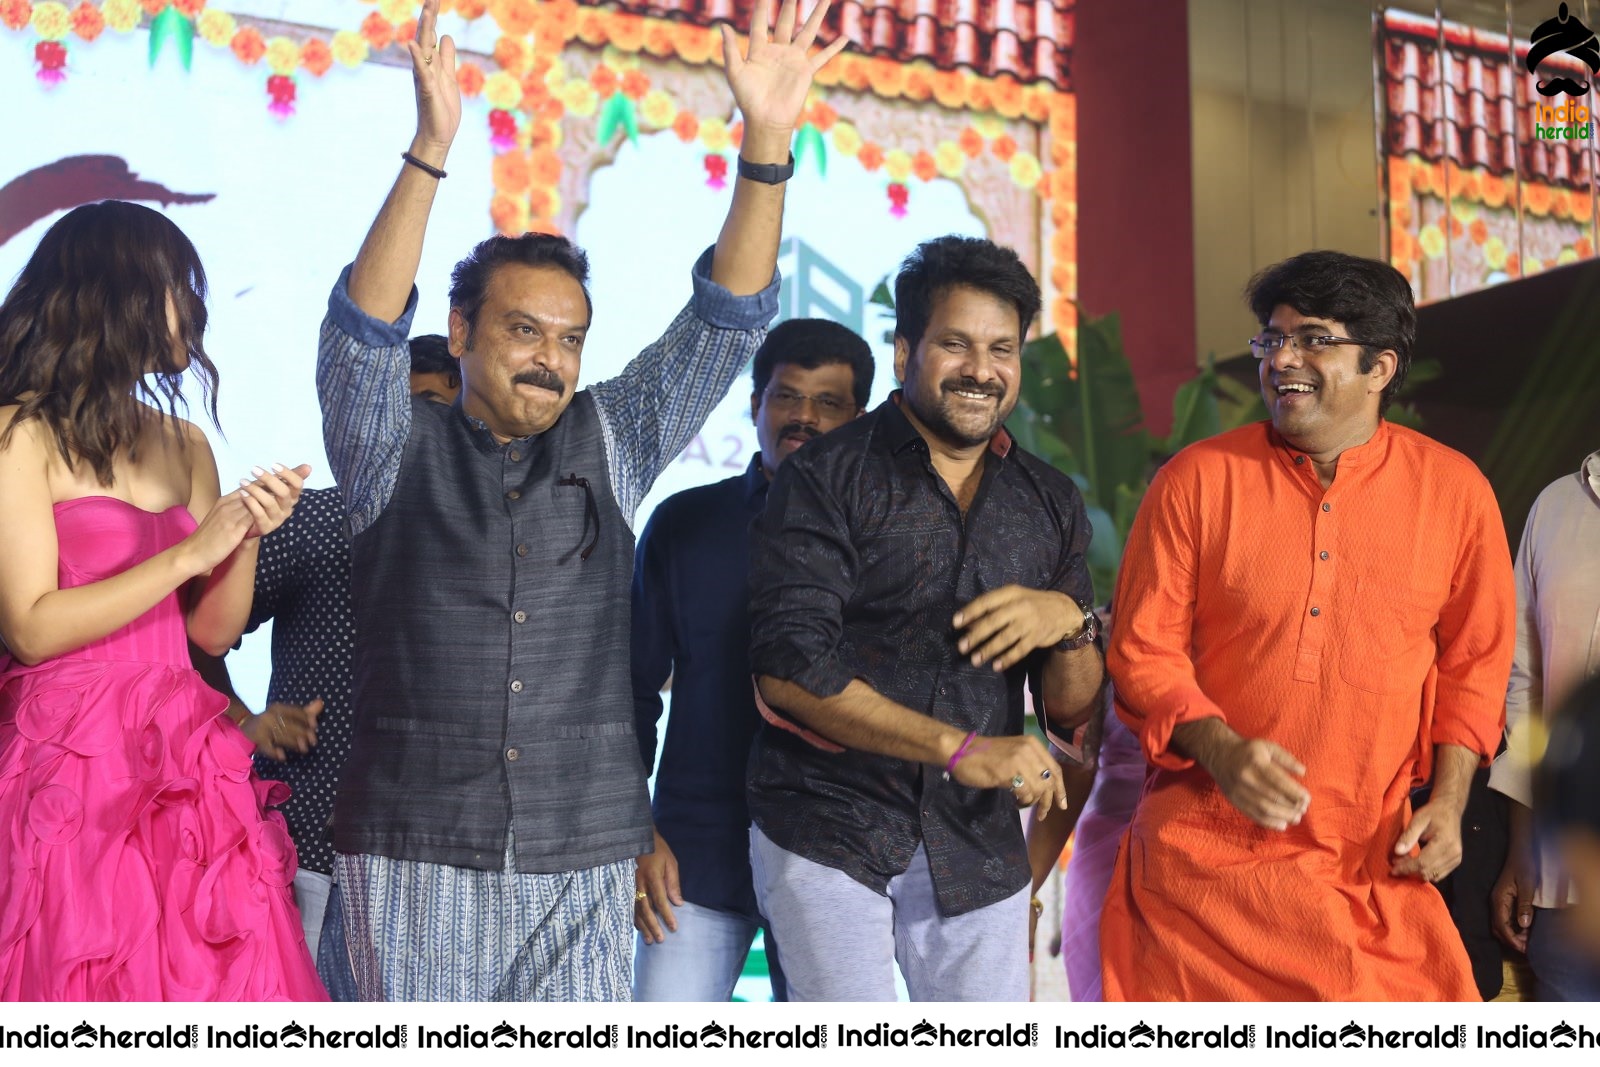 Actors of all ages from Prati Roju Pandage Team Dance On the Stage joyfully Set 2